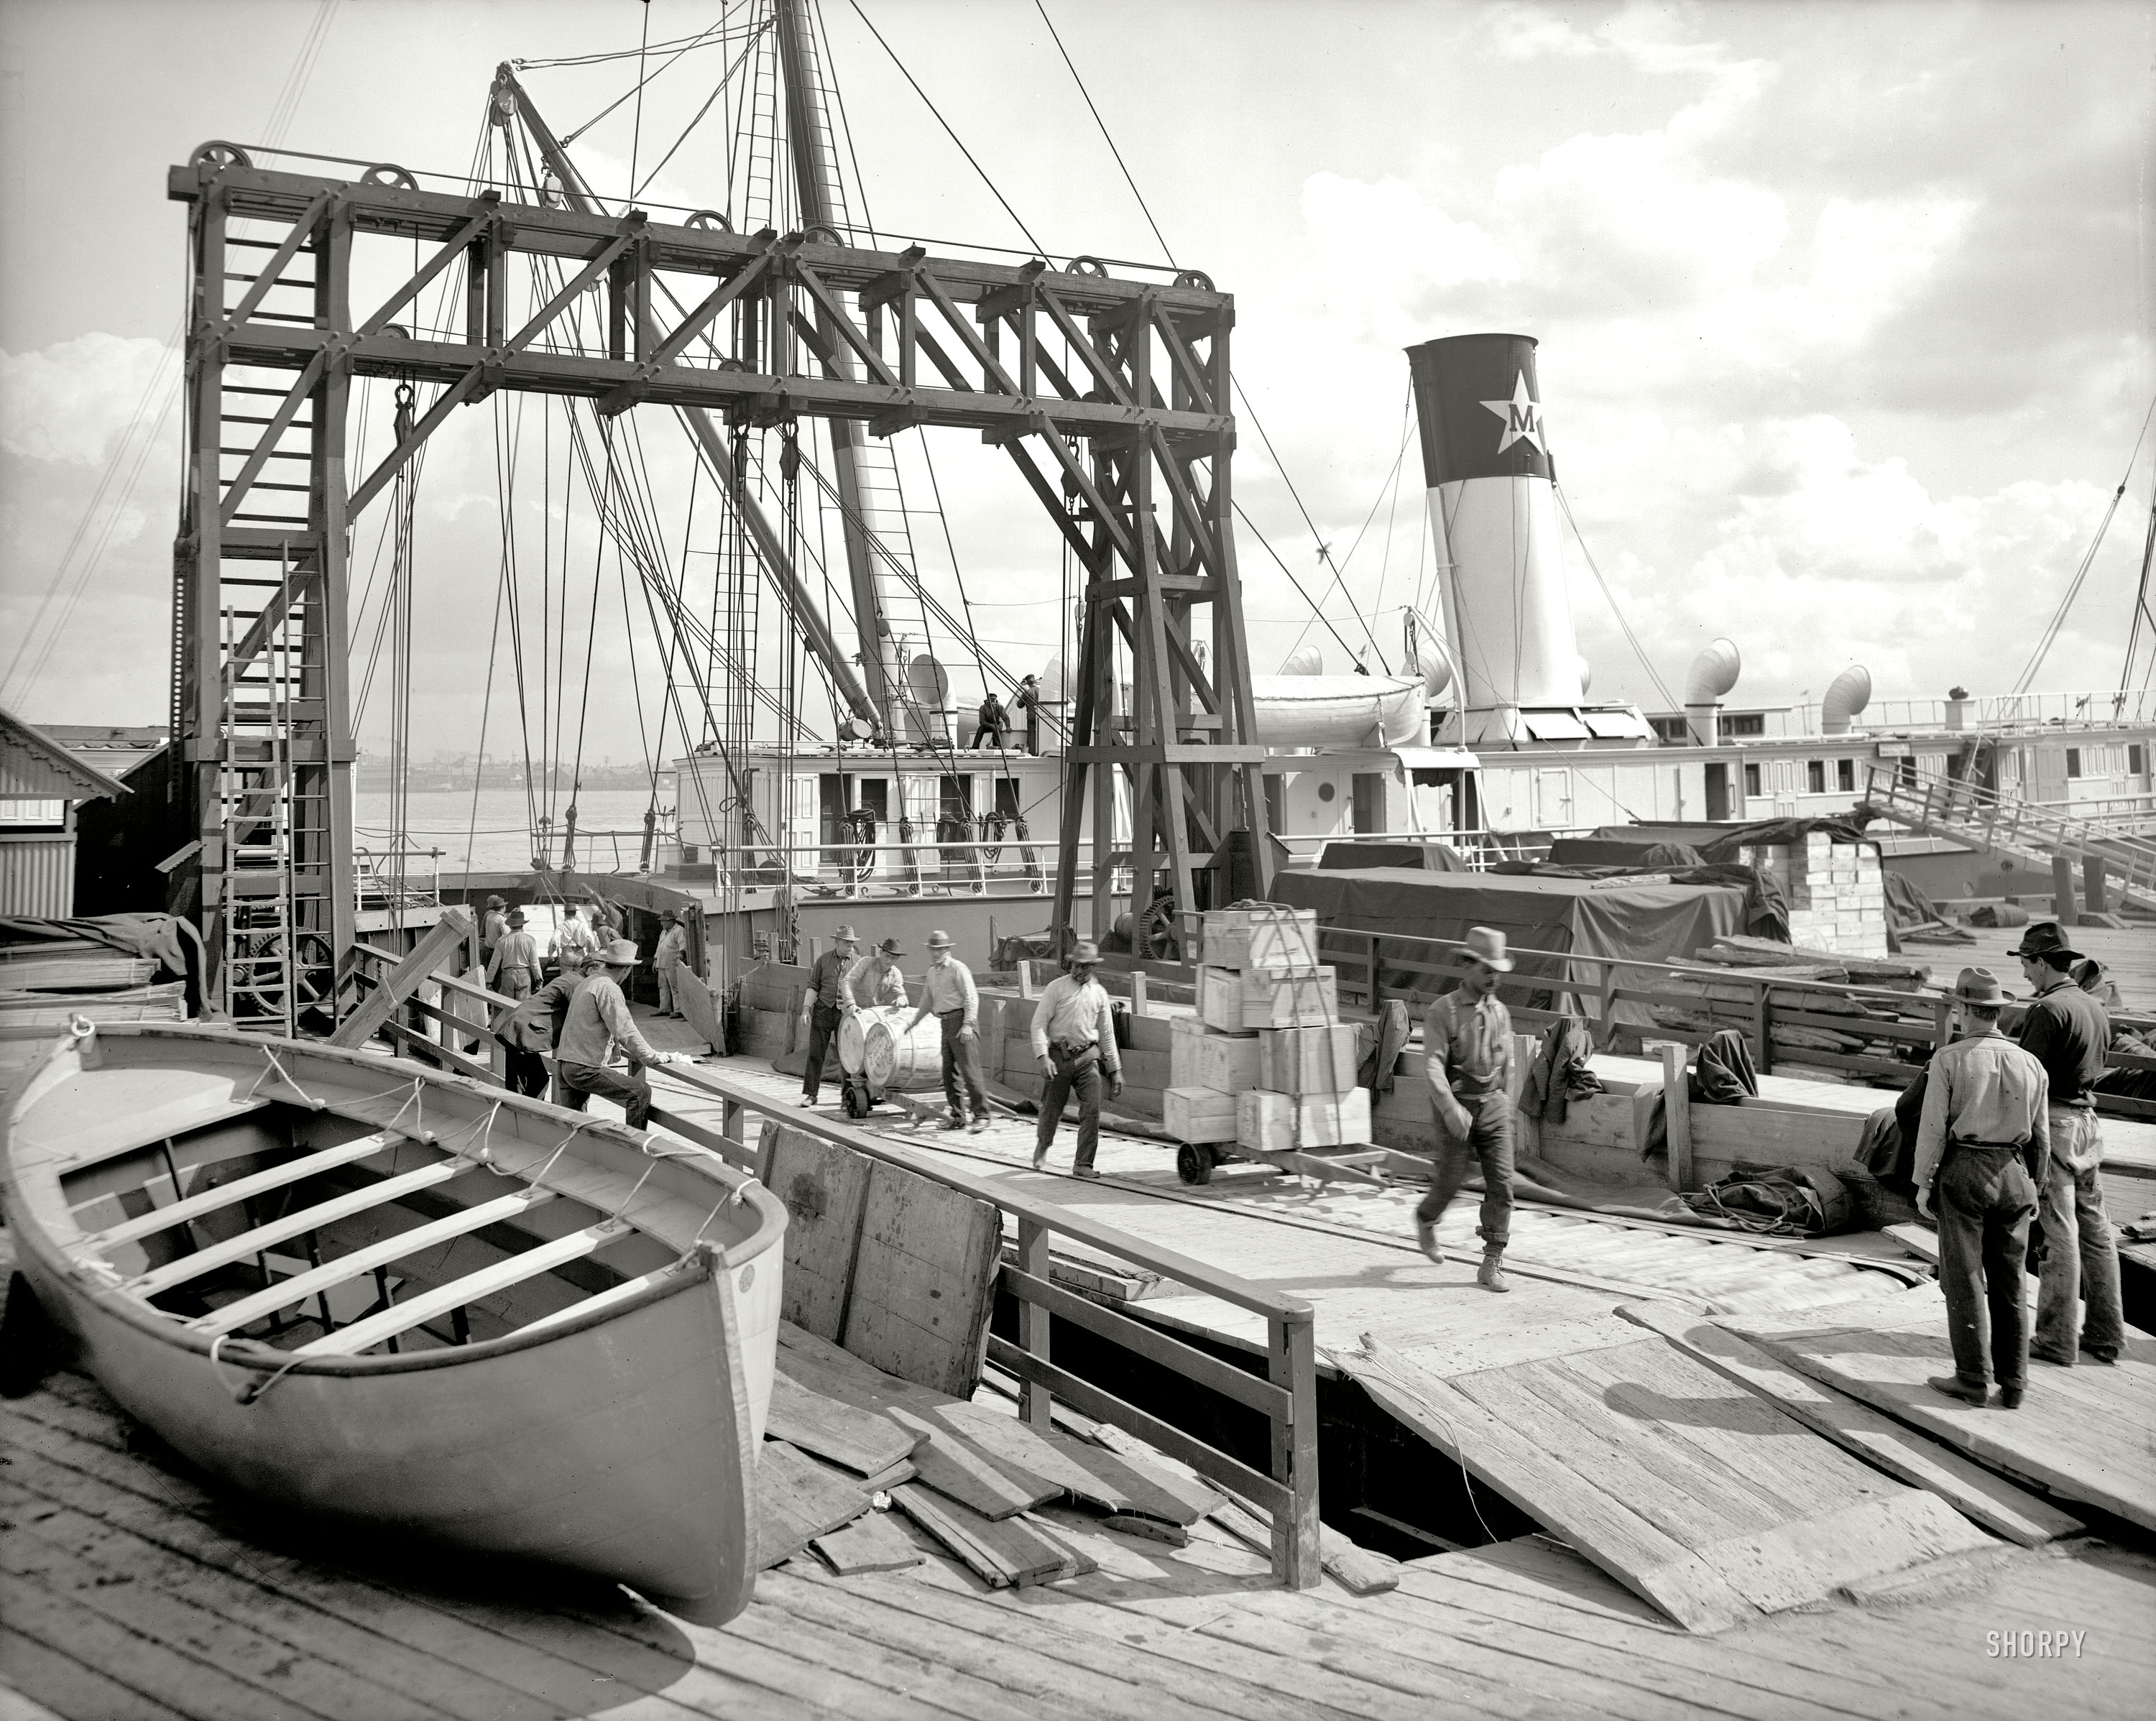 Circa 1906. "Dock conveyors, New Orleans." On the waterfront along the Mississippi. 8x10 inch glass negative, Detroit Publishing Co. View full size.